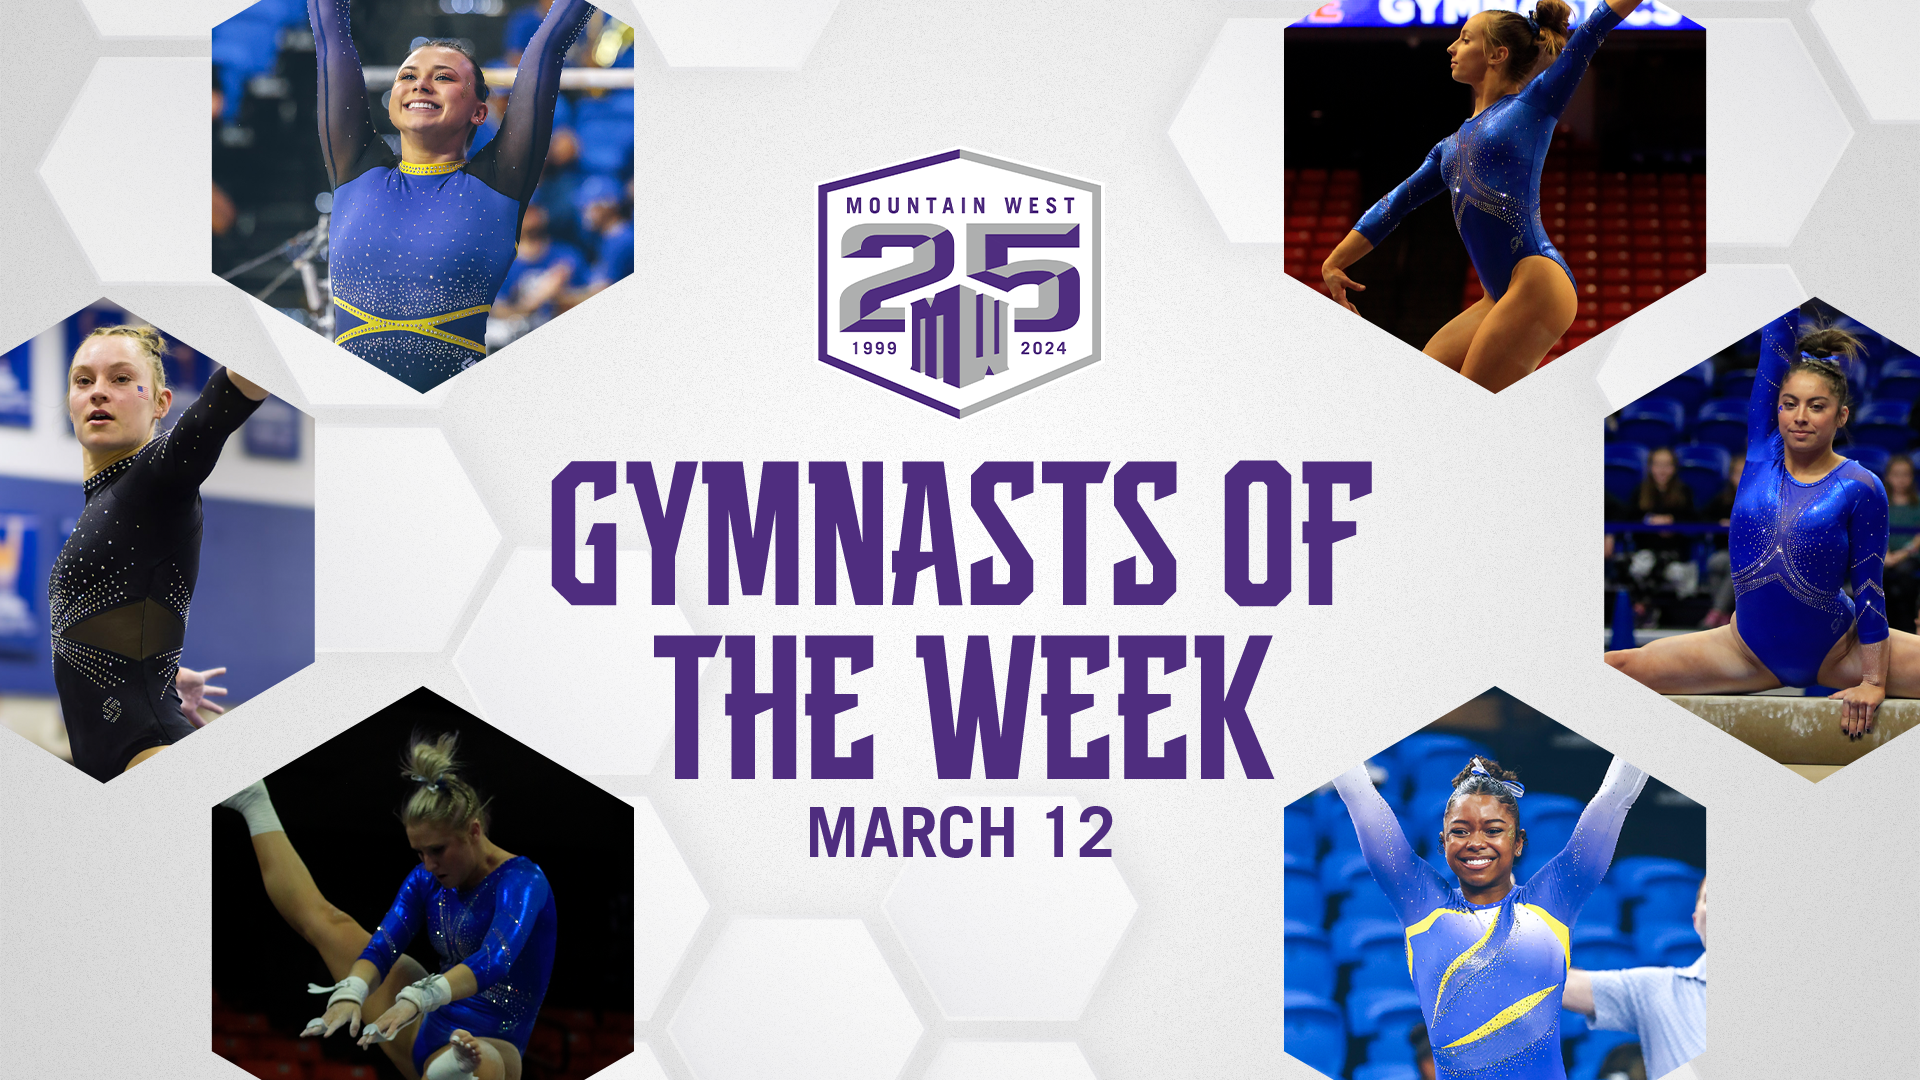 MW Gymnasts of the Week - March 12